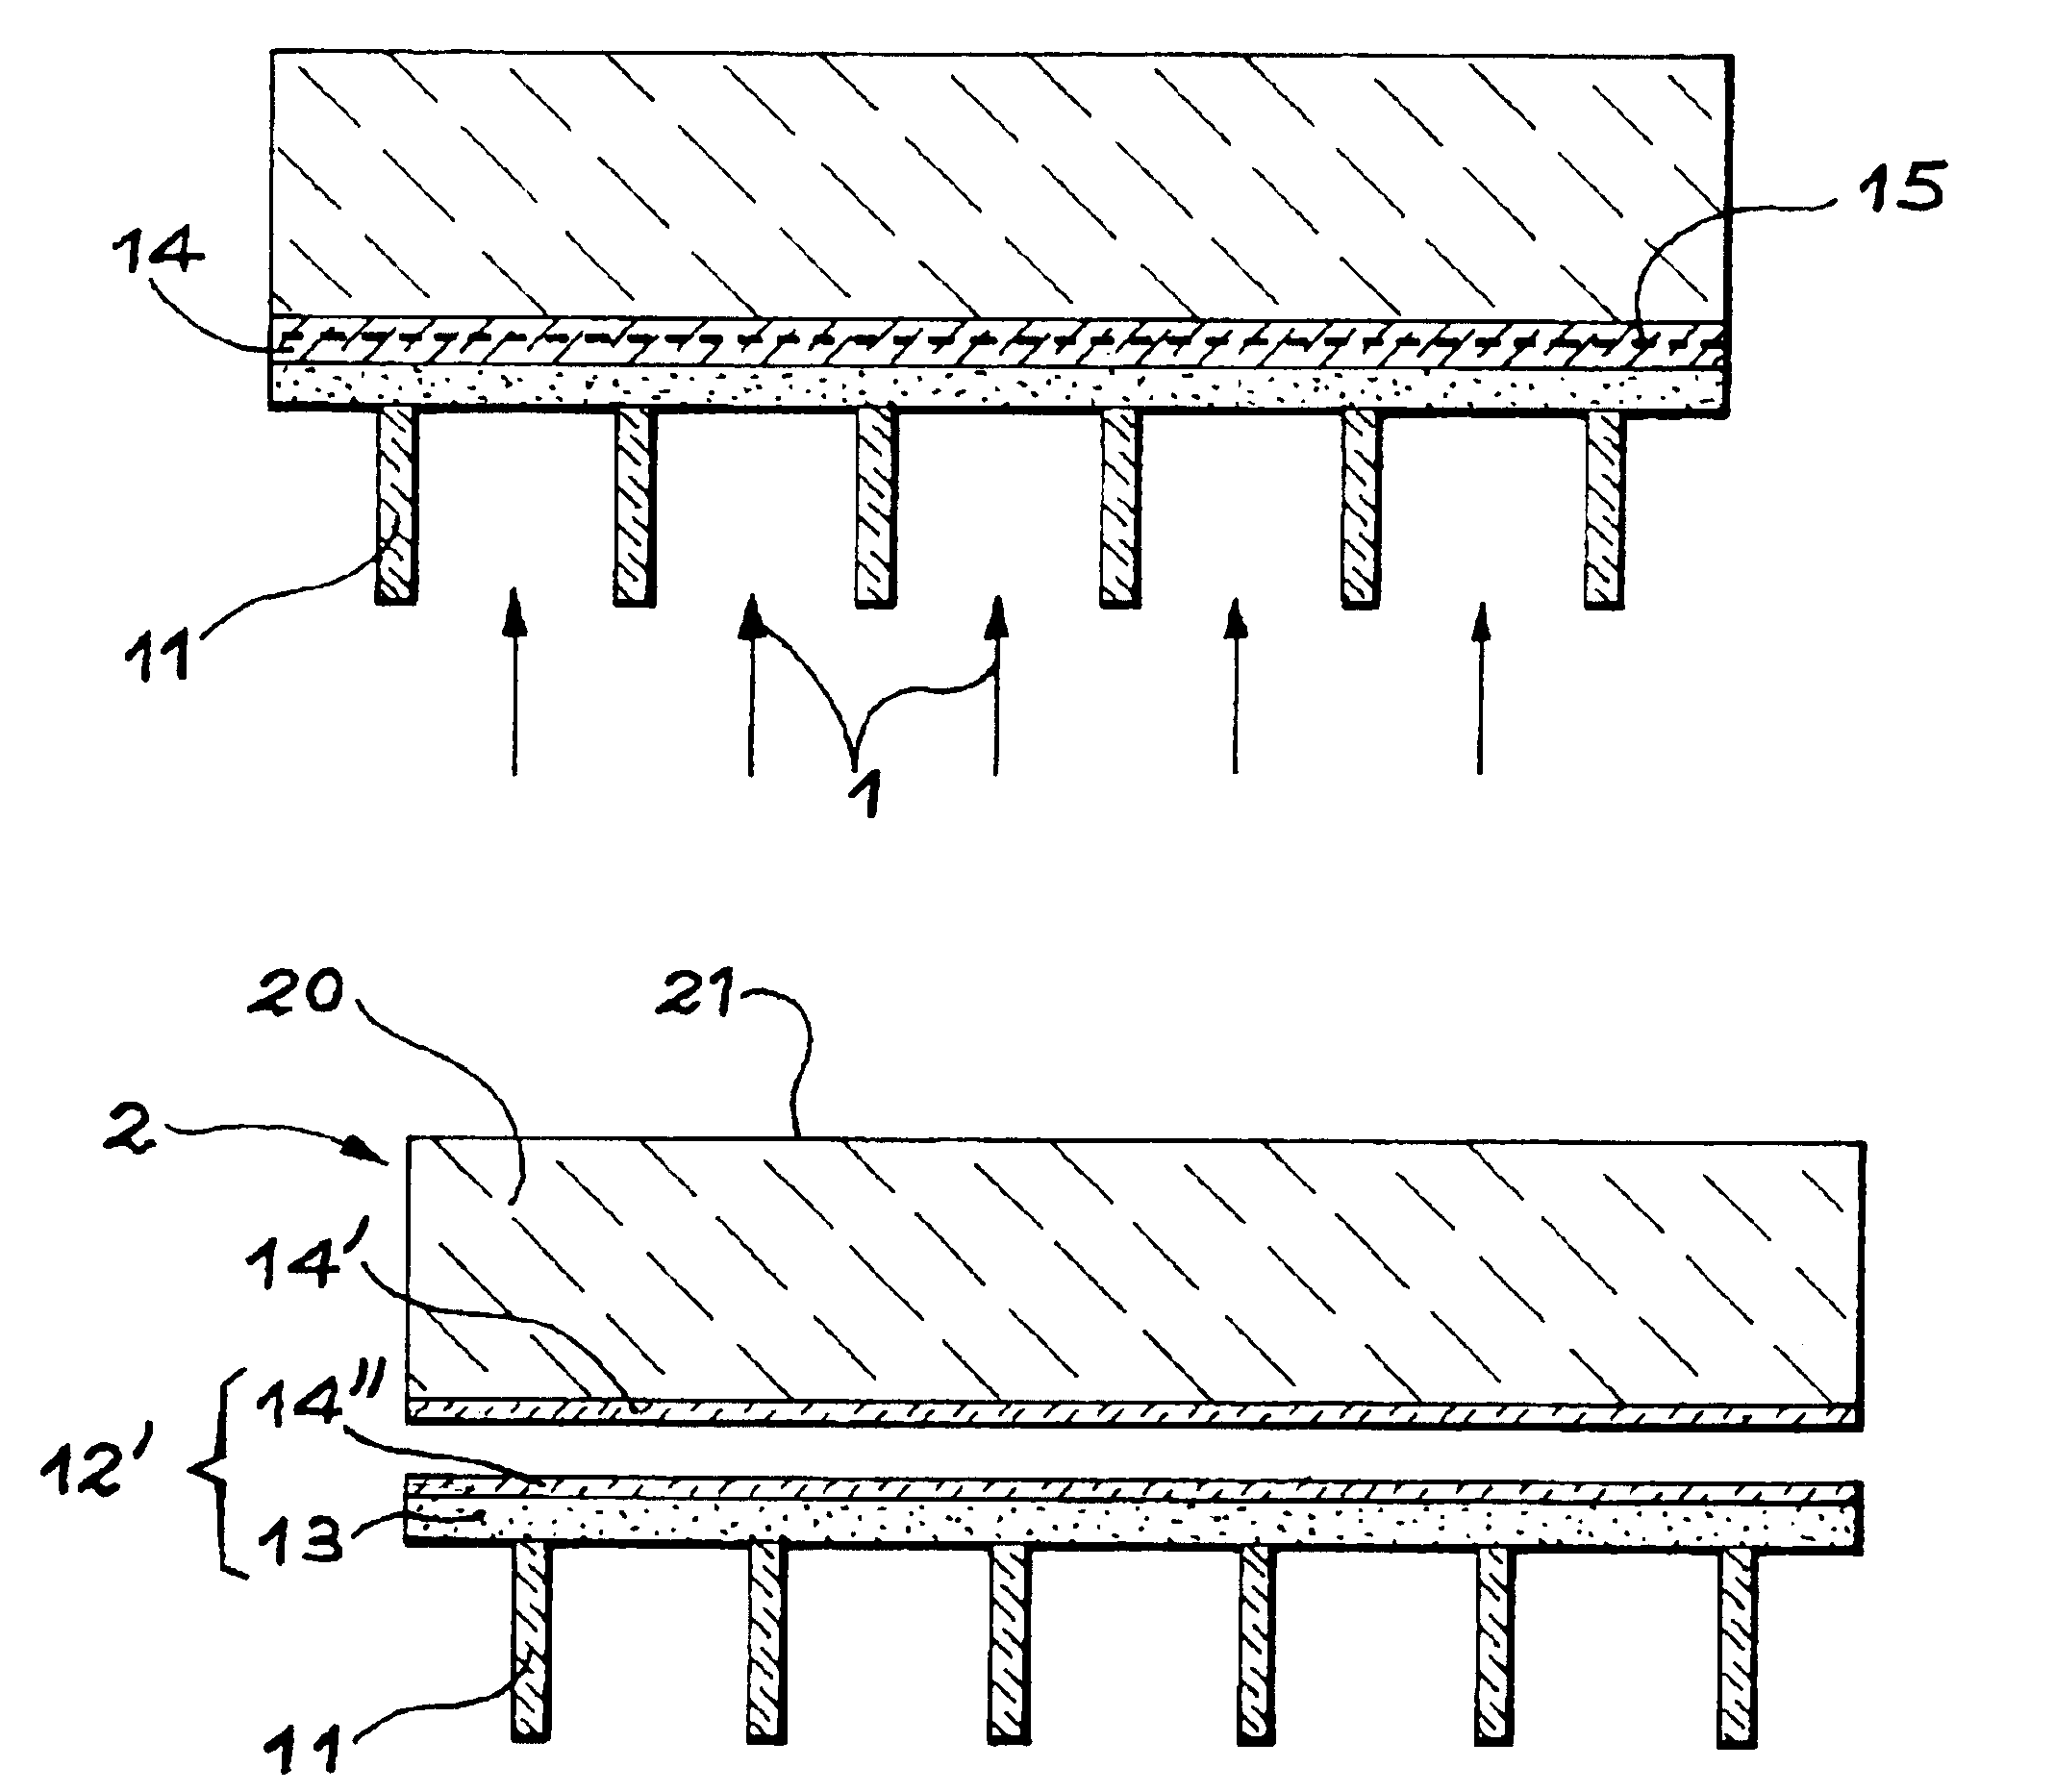 Method for producing a thin film comprising introduction of gaseous species